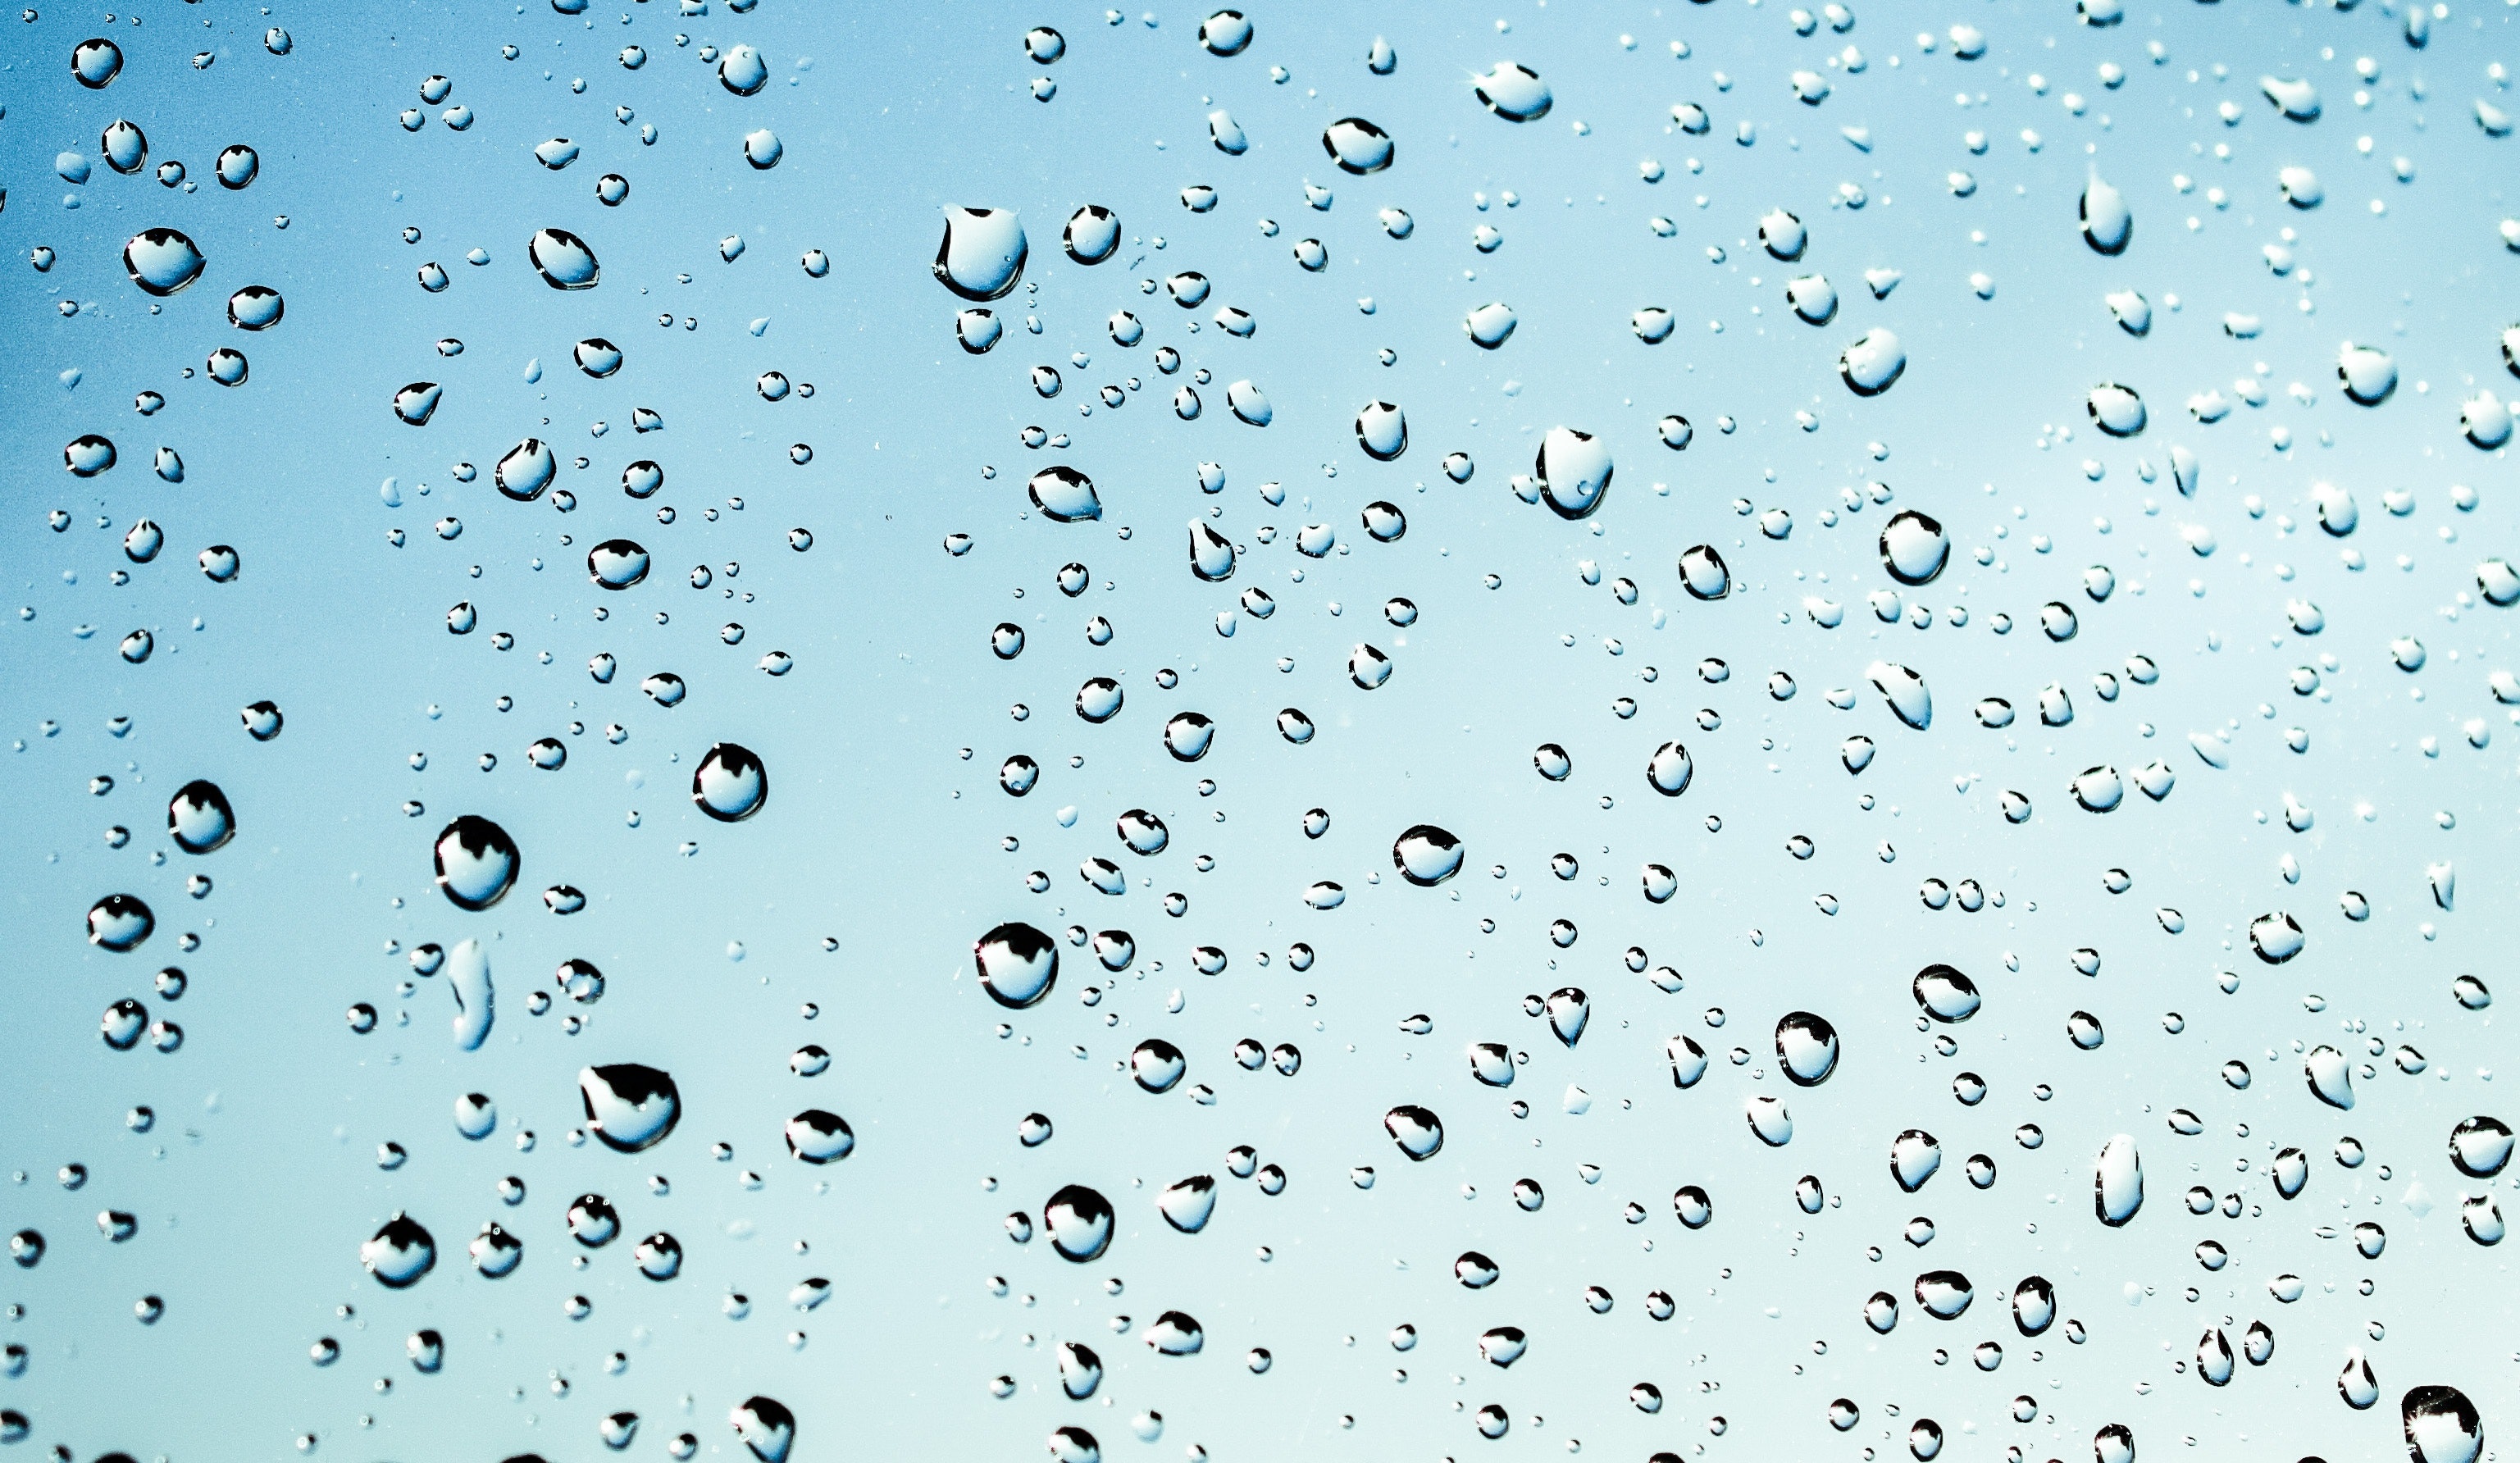 Best Free Raindrops & Image · 100% Royalty Free HD Downloads